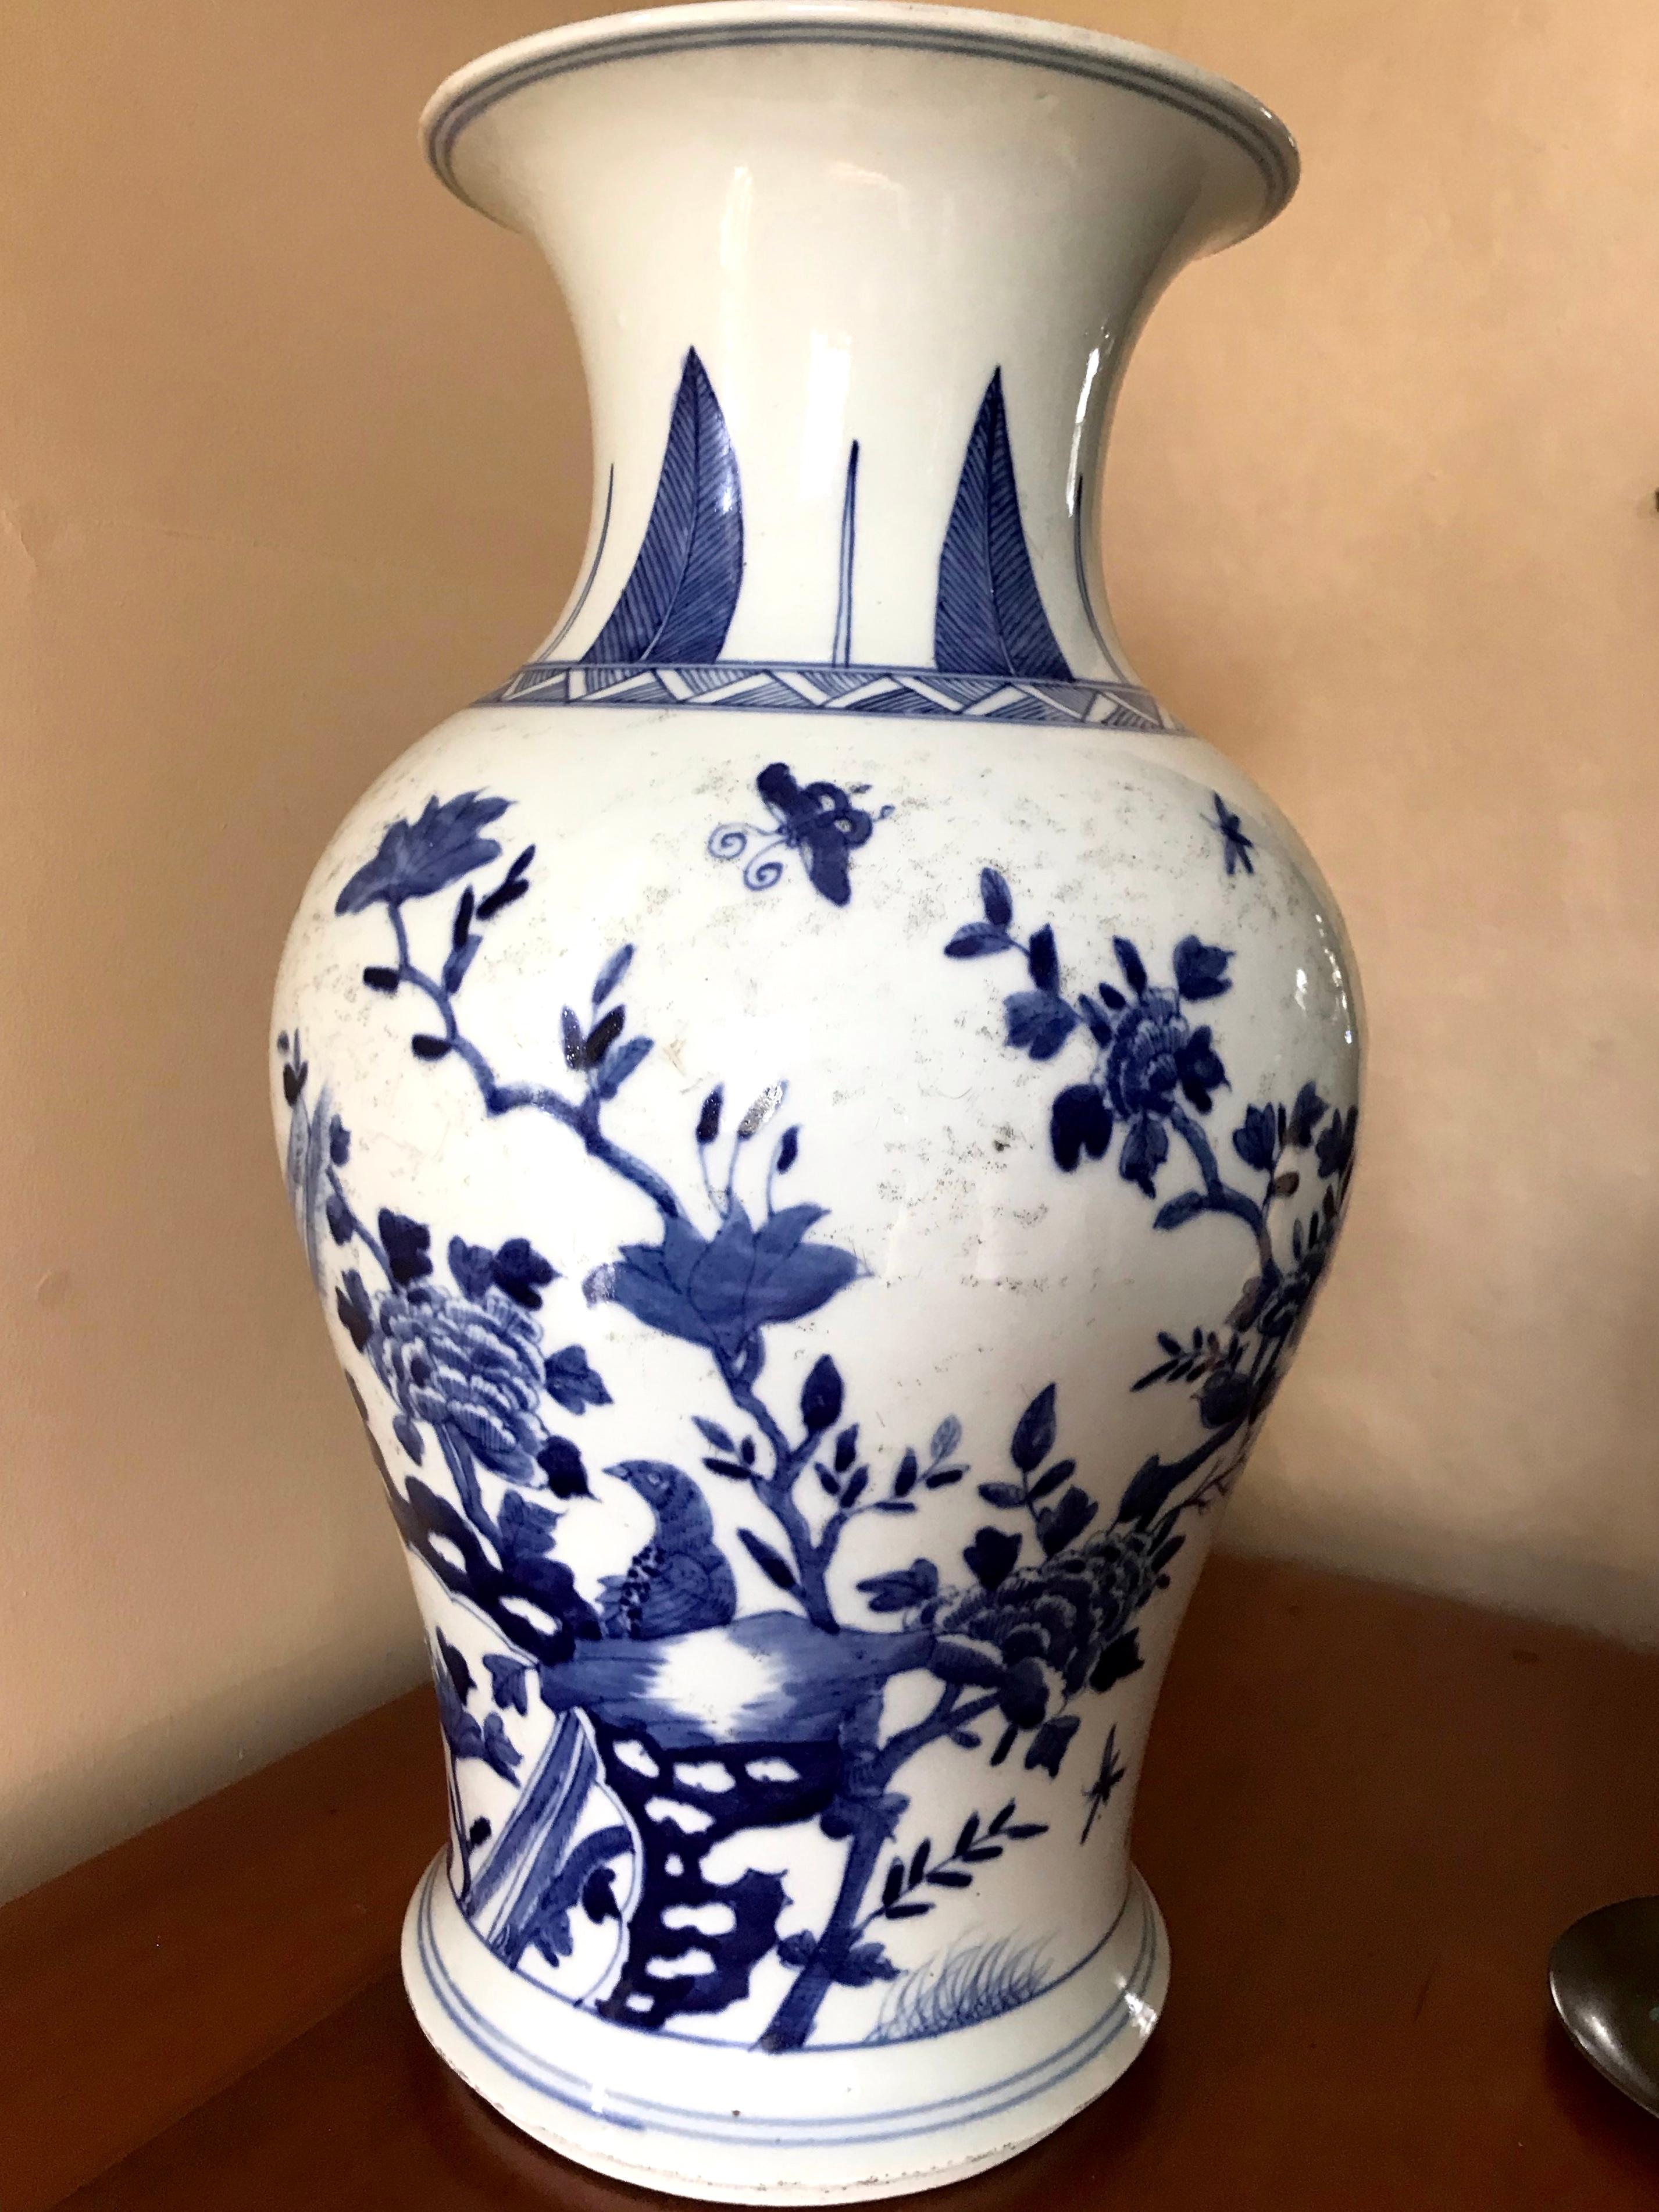 Chinese blue and white baluster vase. Strong blue and white Chinese vase with birds, butterflies and flowering trees surrounding pheasants on rock outcroppings with white and grey mottling to ground and blue rings at neck and base. China, late 19th